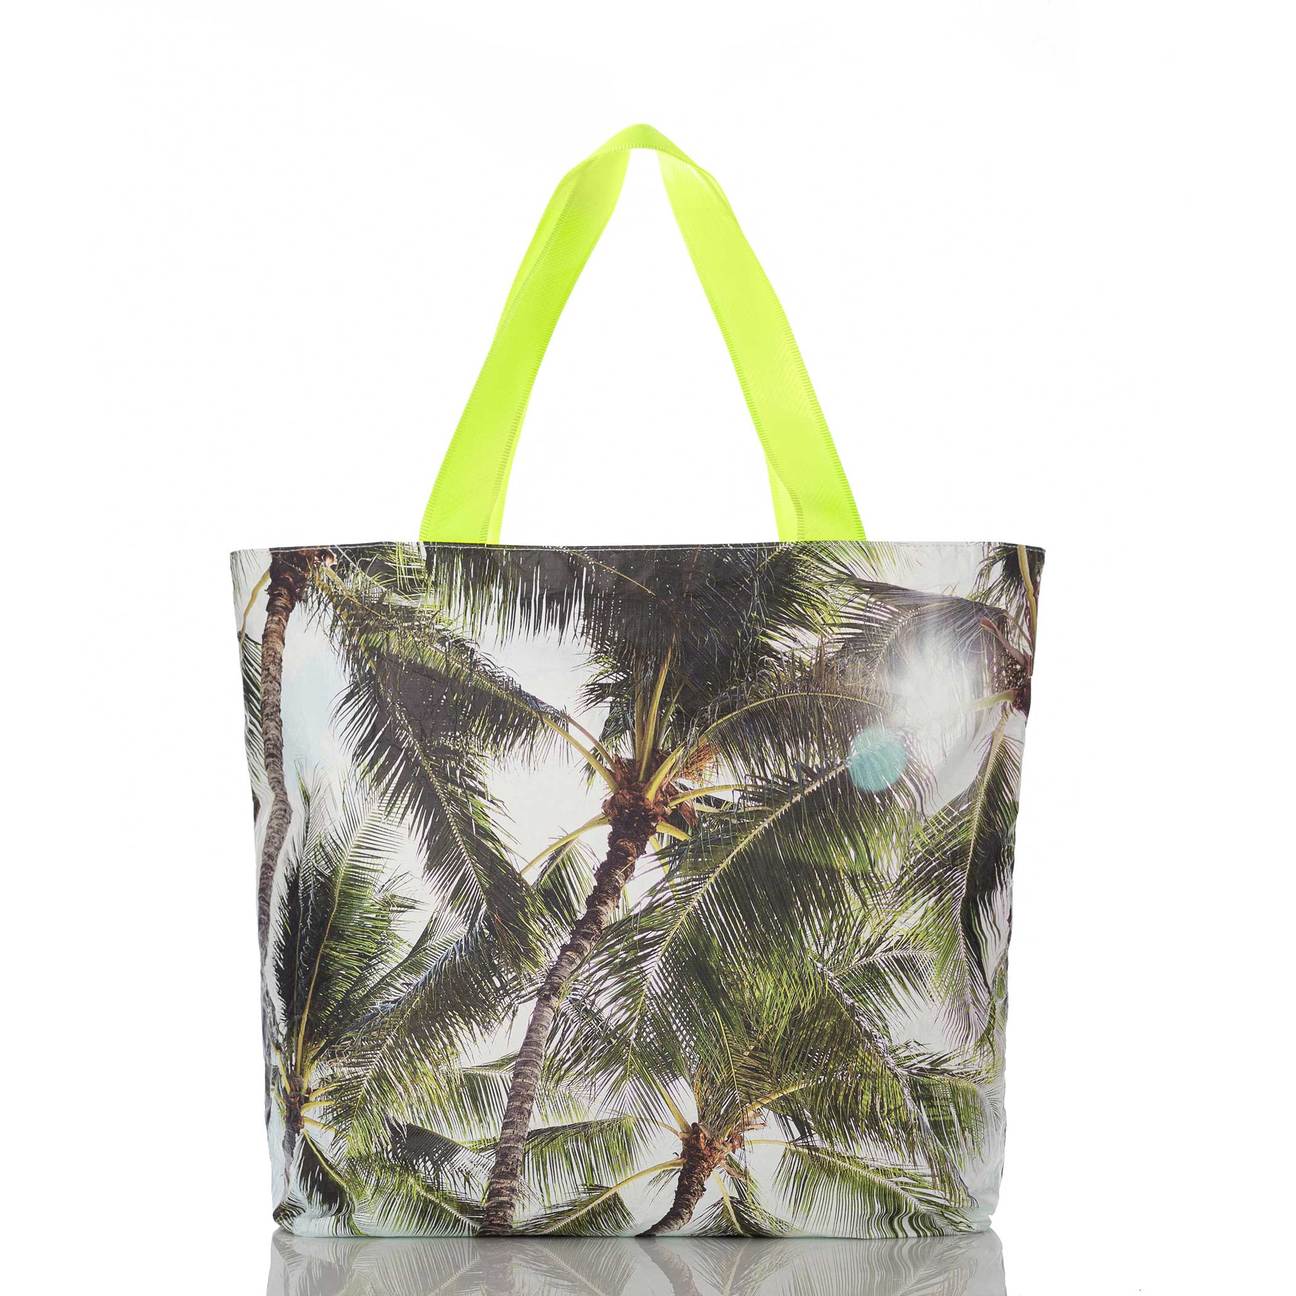 Sway Tote Bags for Sale